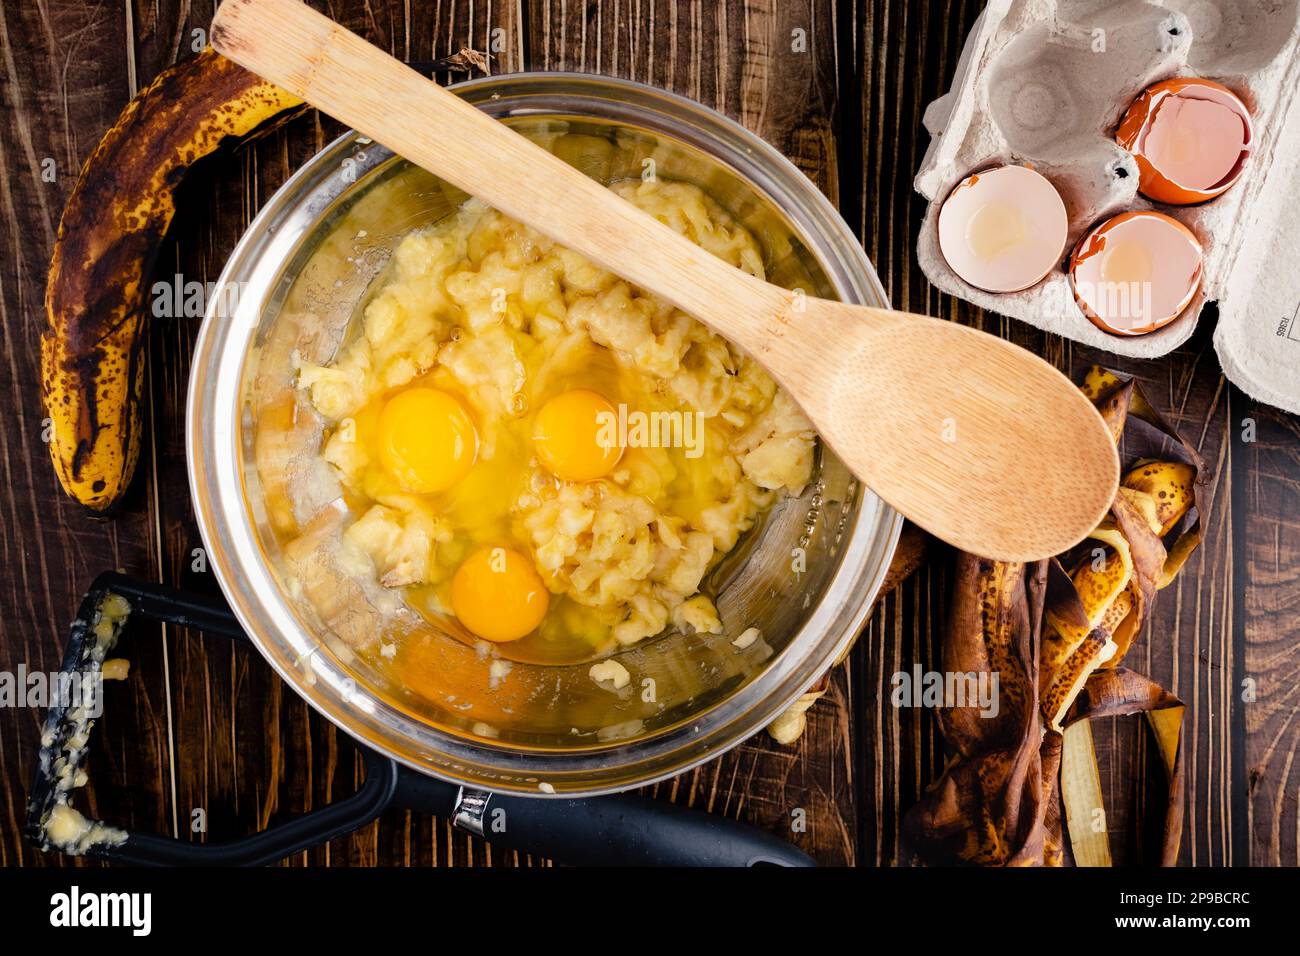 https://c8.alamy.com/comp/2P9BCRC/mashed-bananas-and-eggs-in-a-mixing-bowl-with-a-wooden-spoon-ingredients-for-making-banana-bread-with-a-potato-masher-and-banana-peels-2P9BCRC.jpg